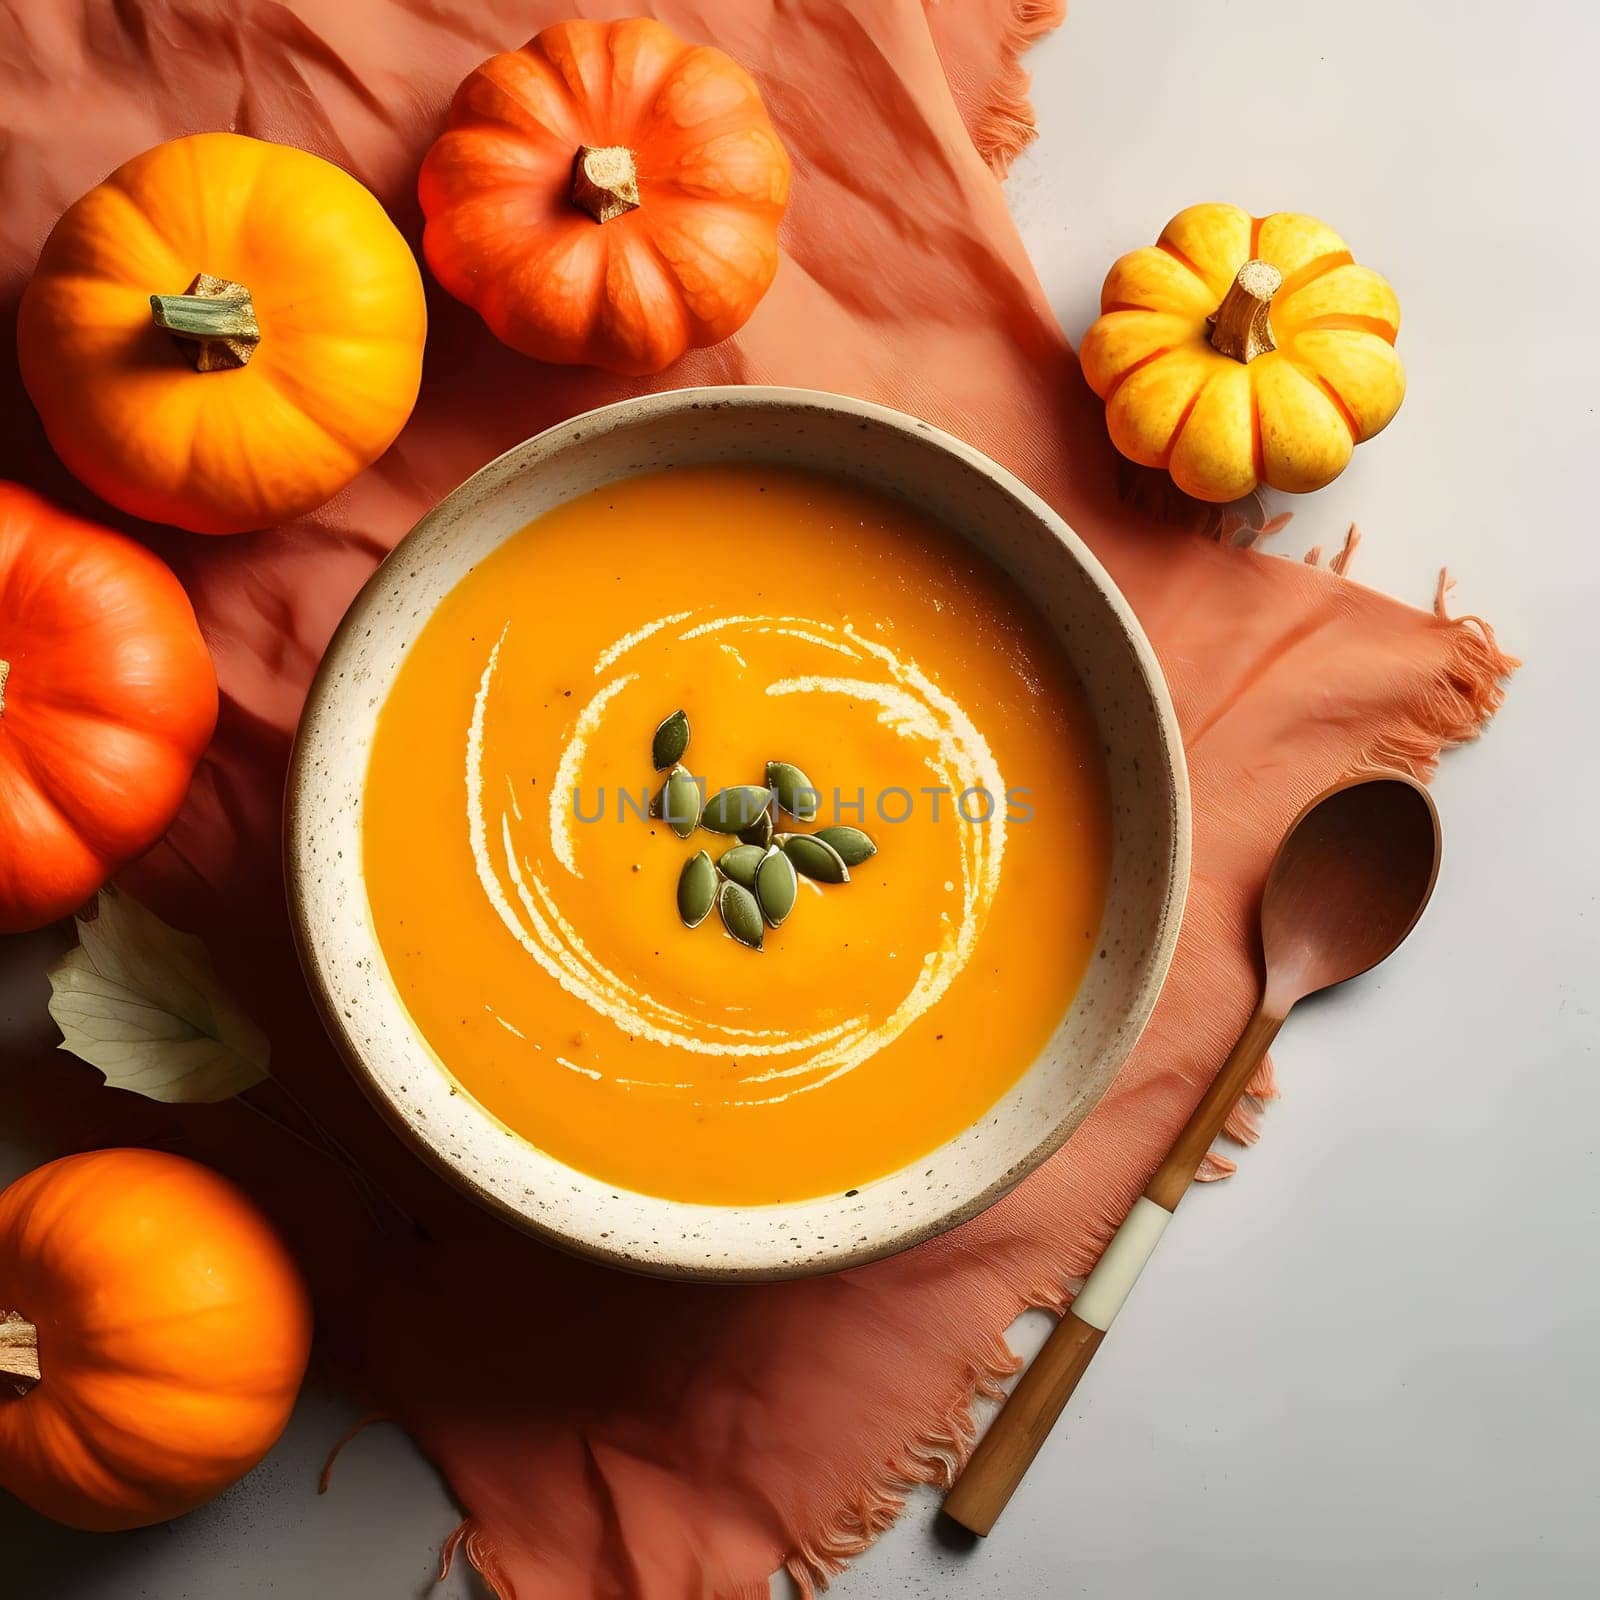 Top view of a bowl of pumpkin soup and seeds all around elegant fabric and small pumpkins. Pumpkin as a dish of thanksgiving for the harvest. An atmosphere of joy and celebration.